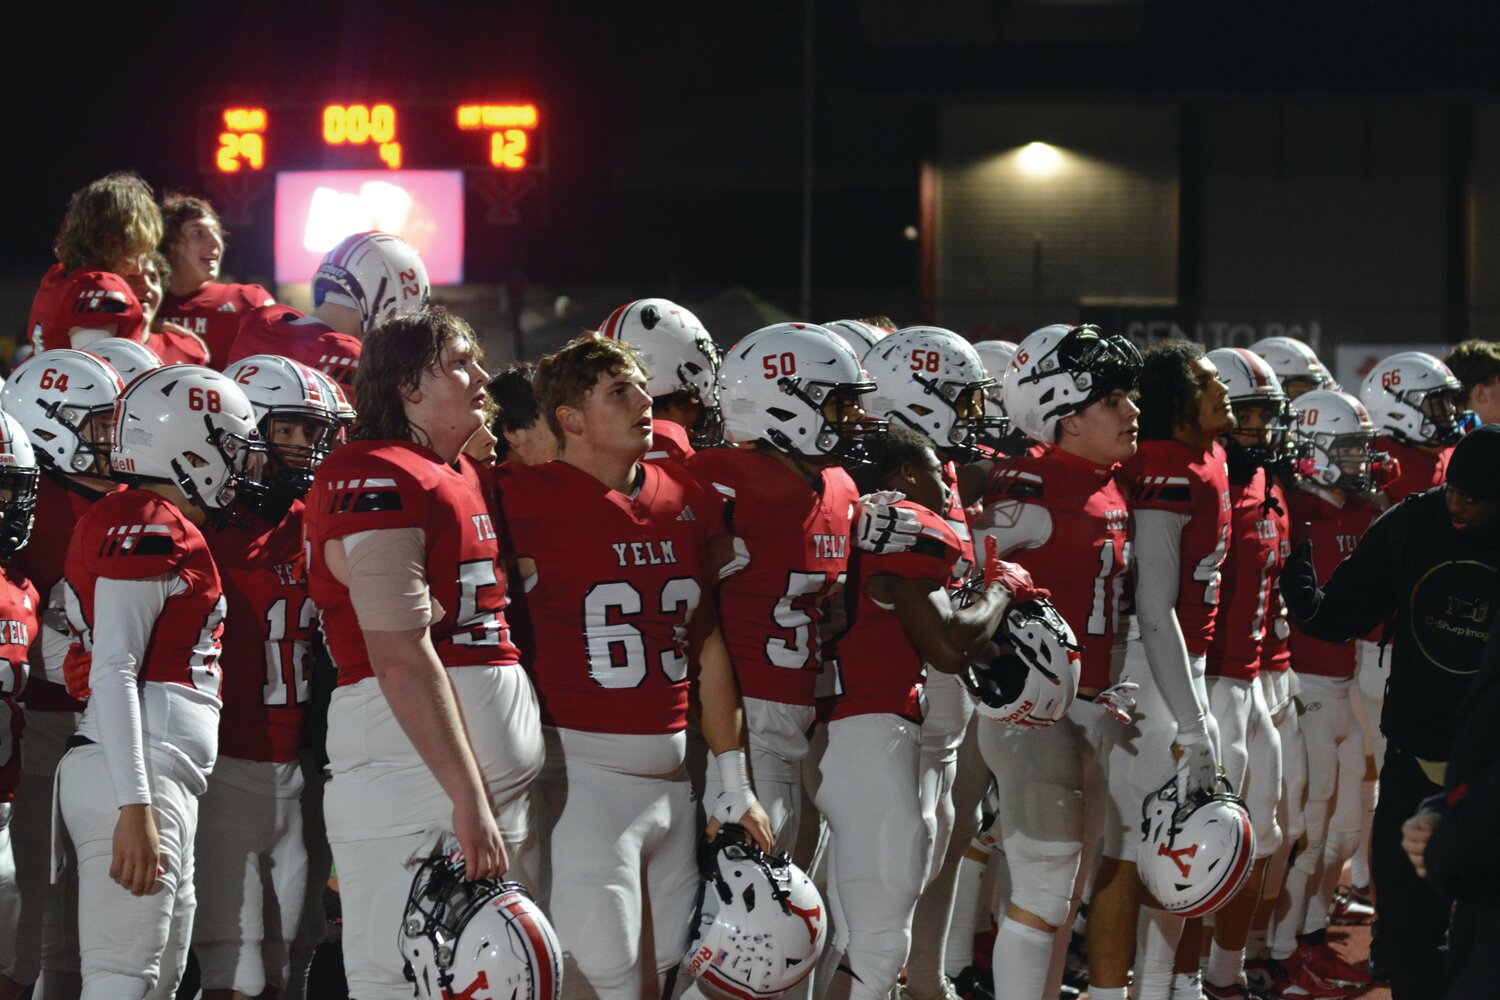 Yelm’s football team locks arms and sings John Denver’s “Take Me Home, Country Roads” after a 29-12 victory over Mount Tahoma in the 3A state quarterfinals on Nov. 17.